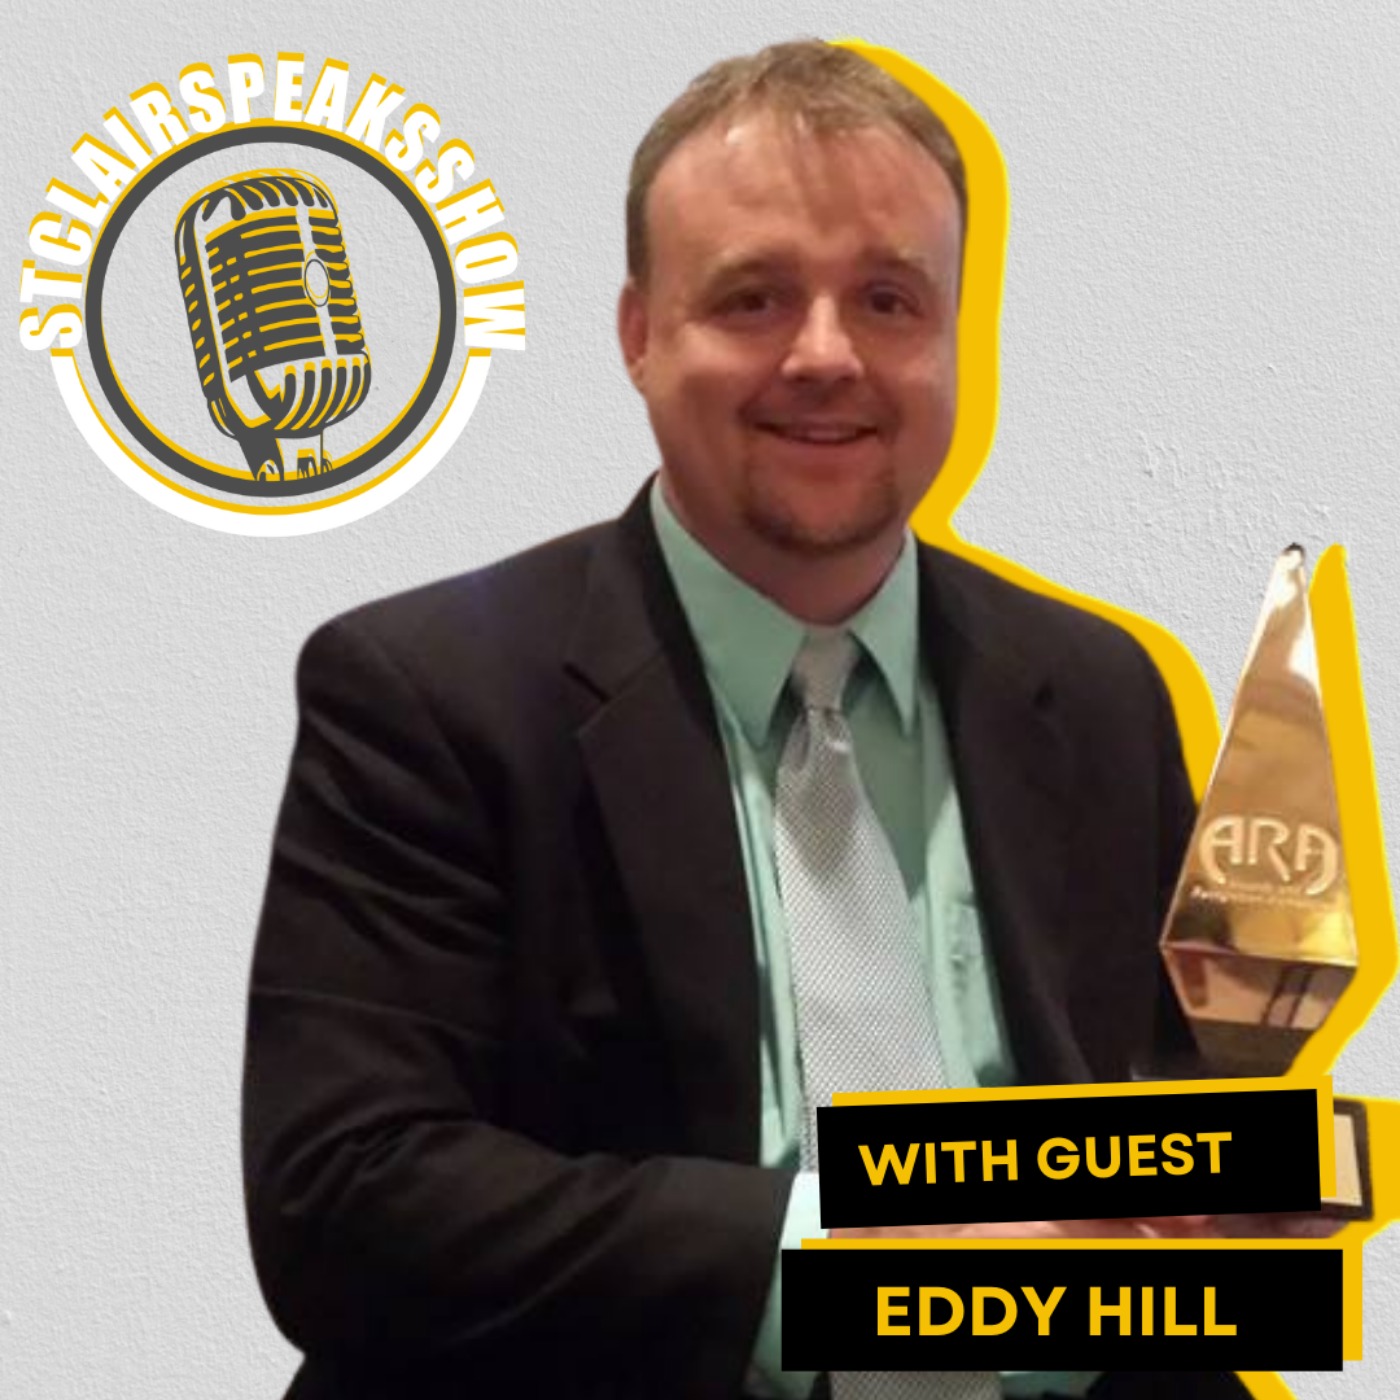 The StclairSpeaksShow Podcast With Eddy Hill - The Prosper Formula Program, Retention & Acquisition Image